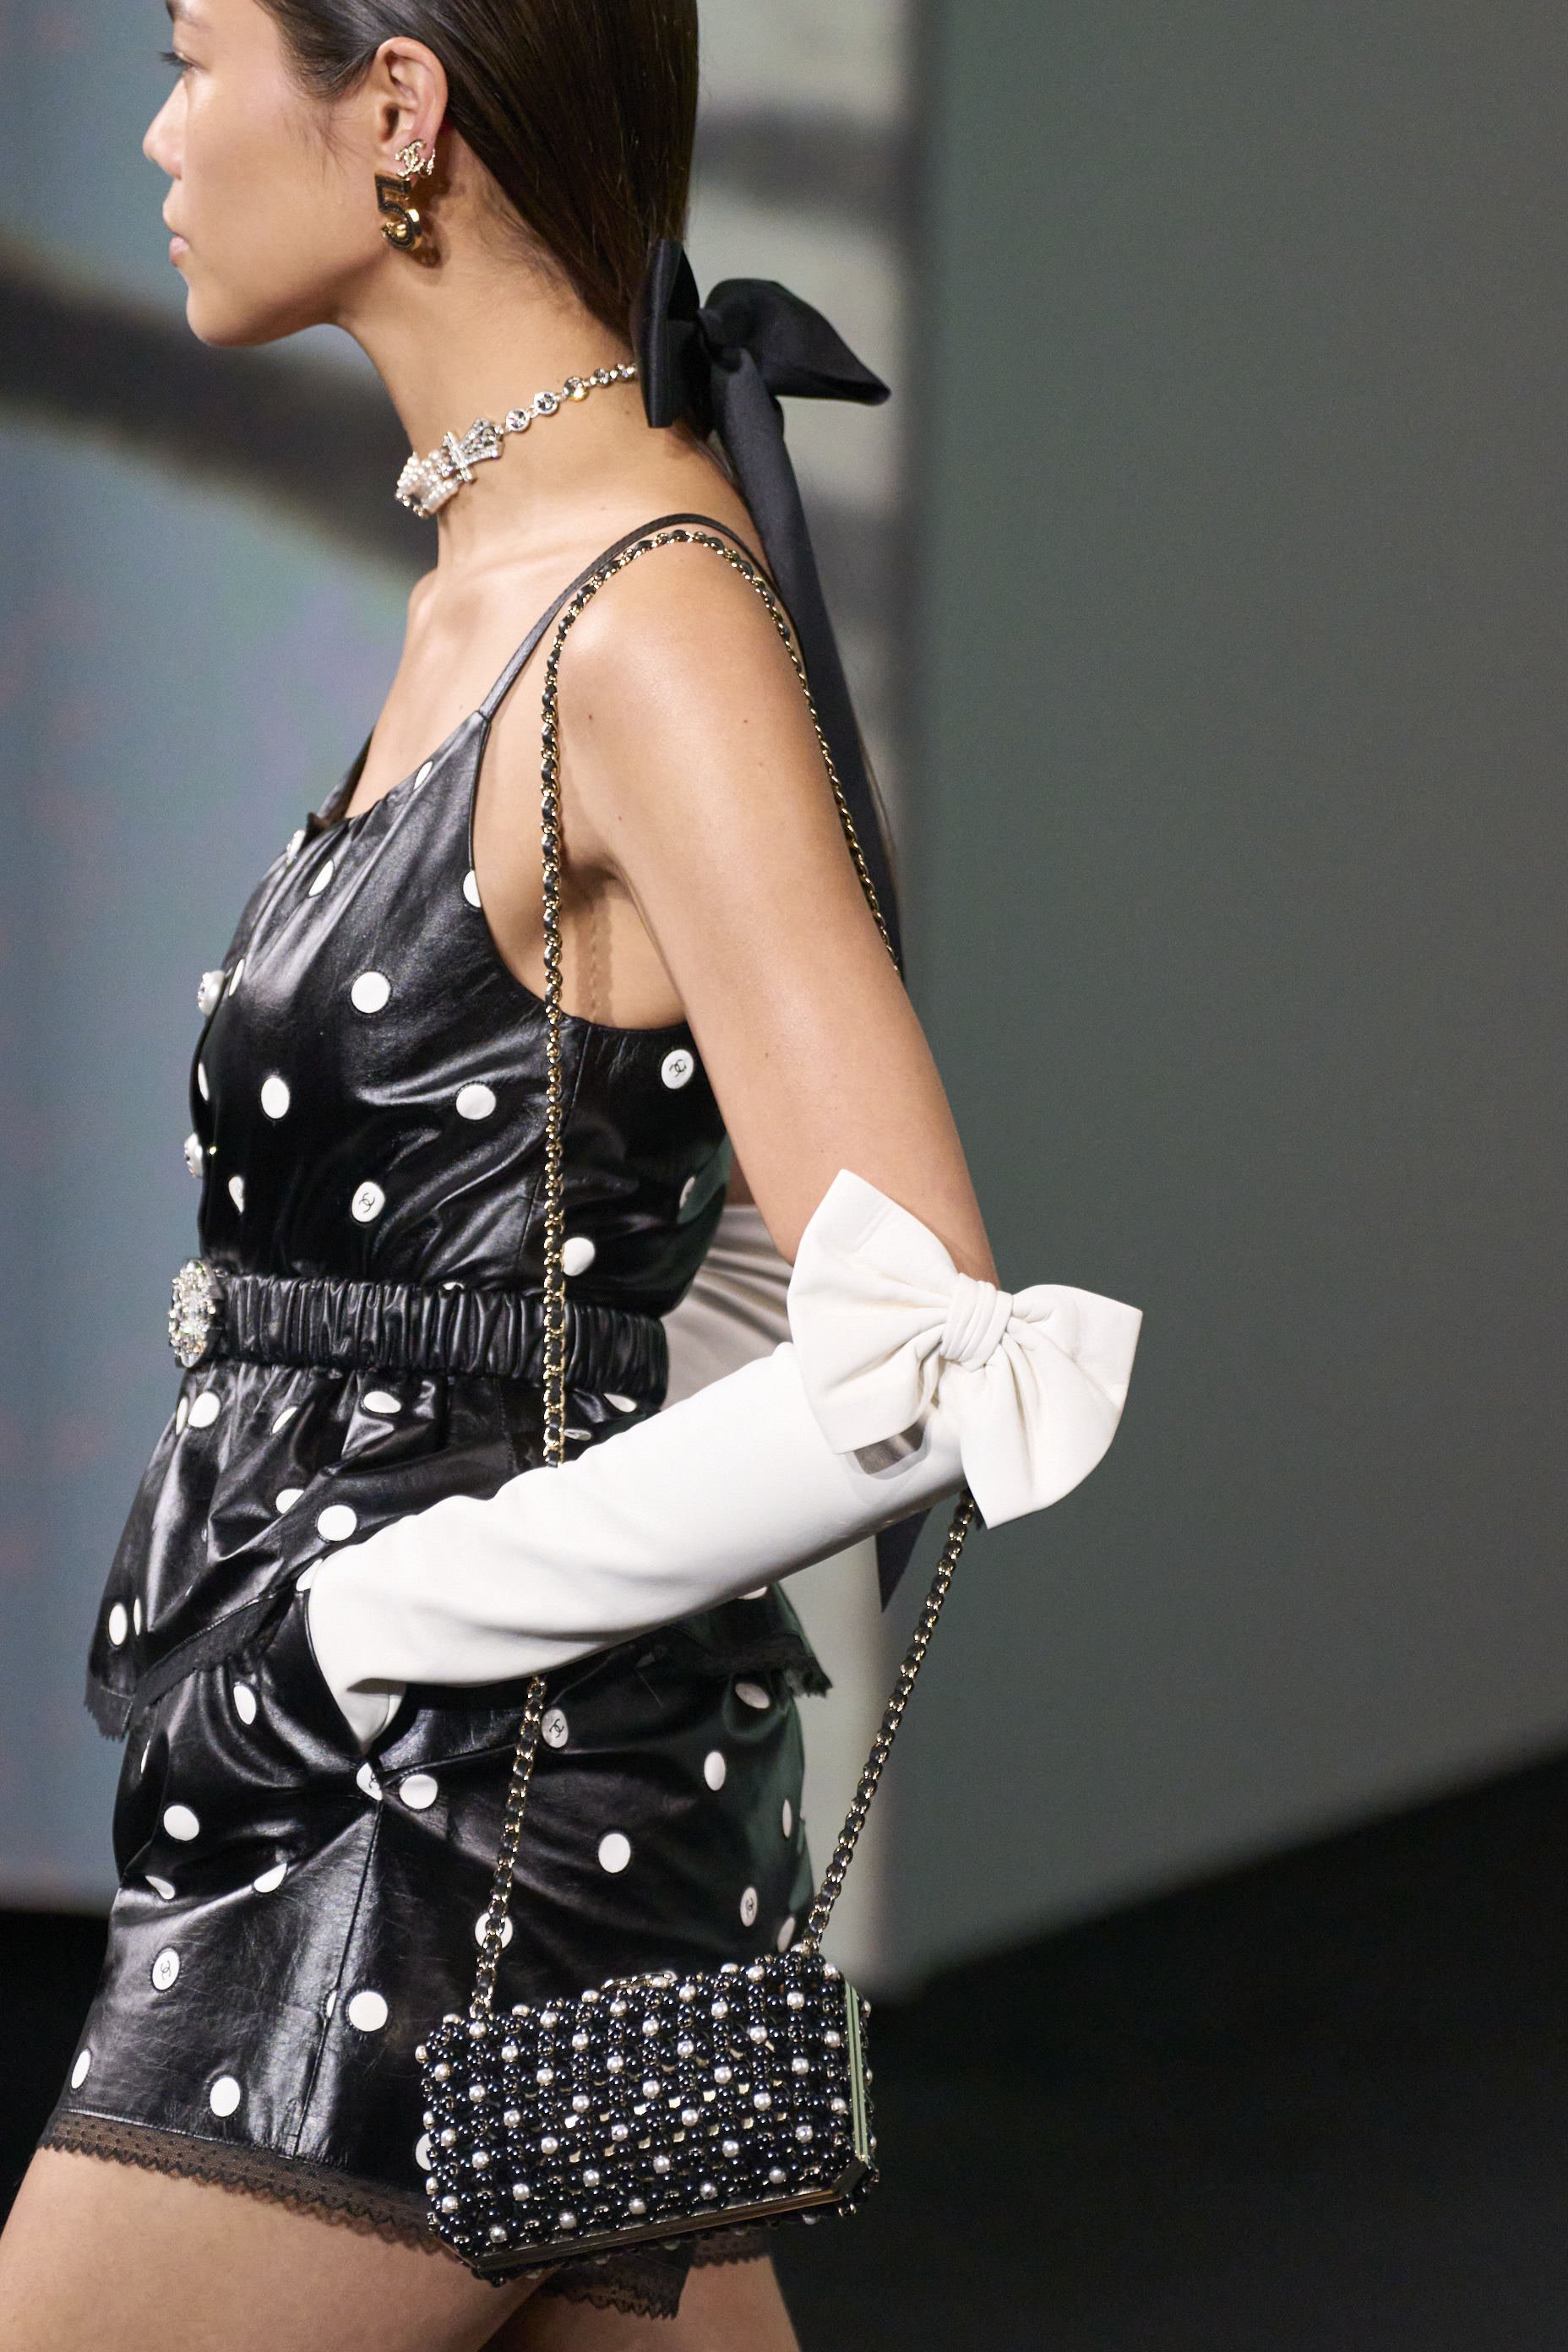 There was also no shortage of bows at the Chanel show to adorn the polished low ponytails.